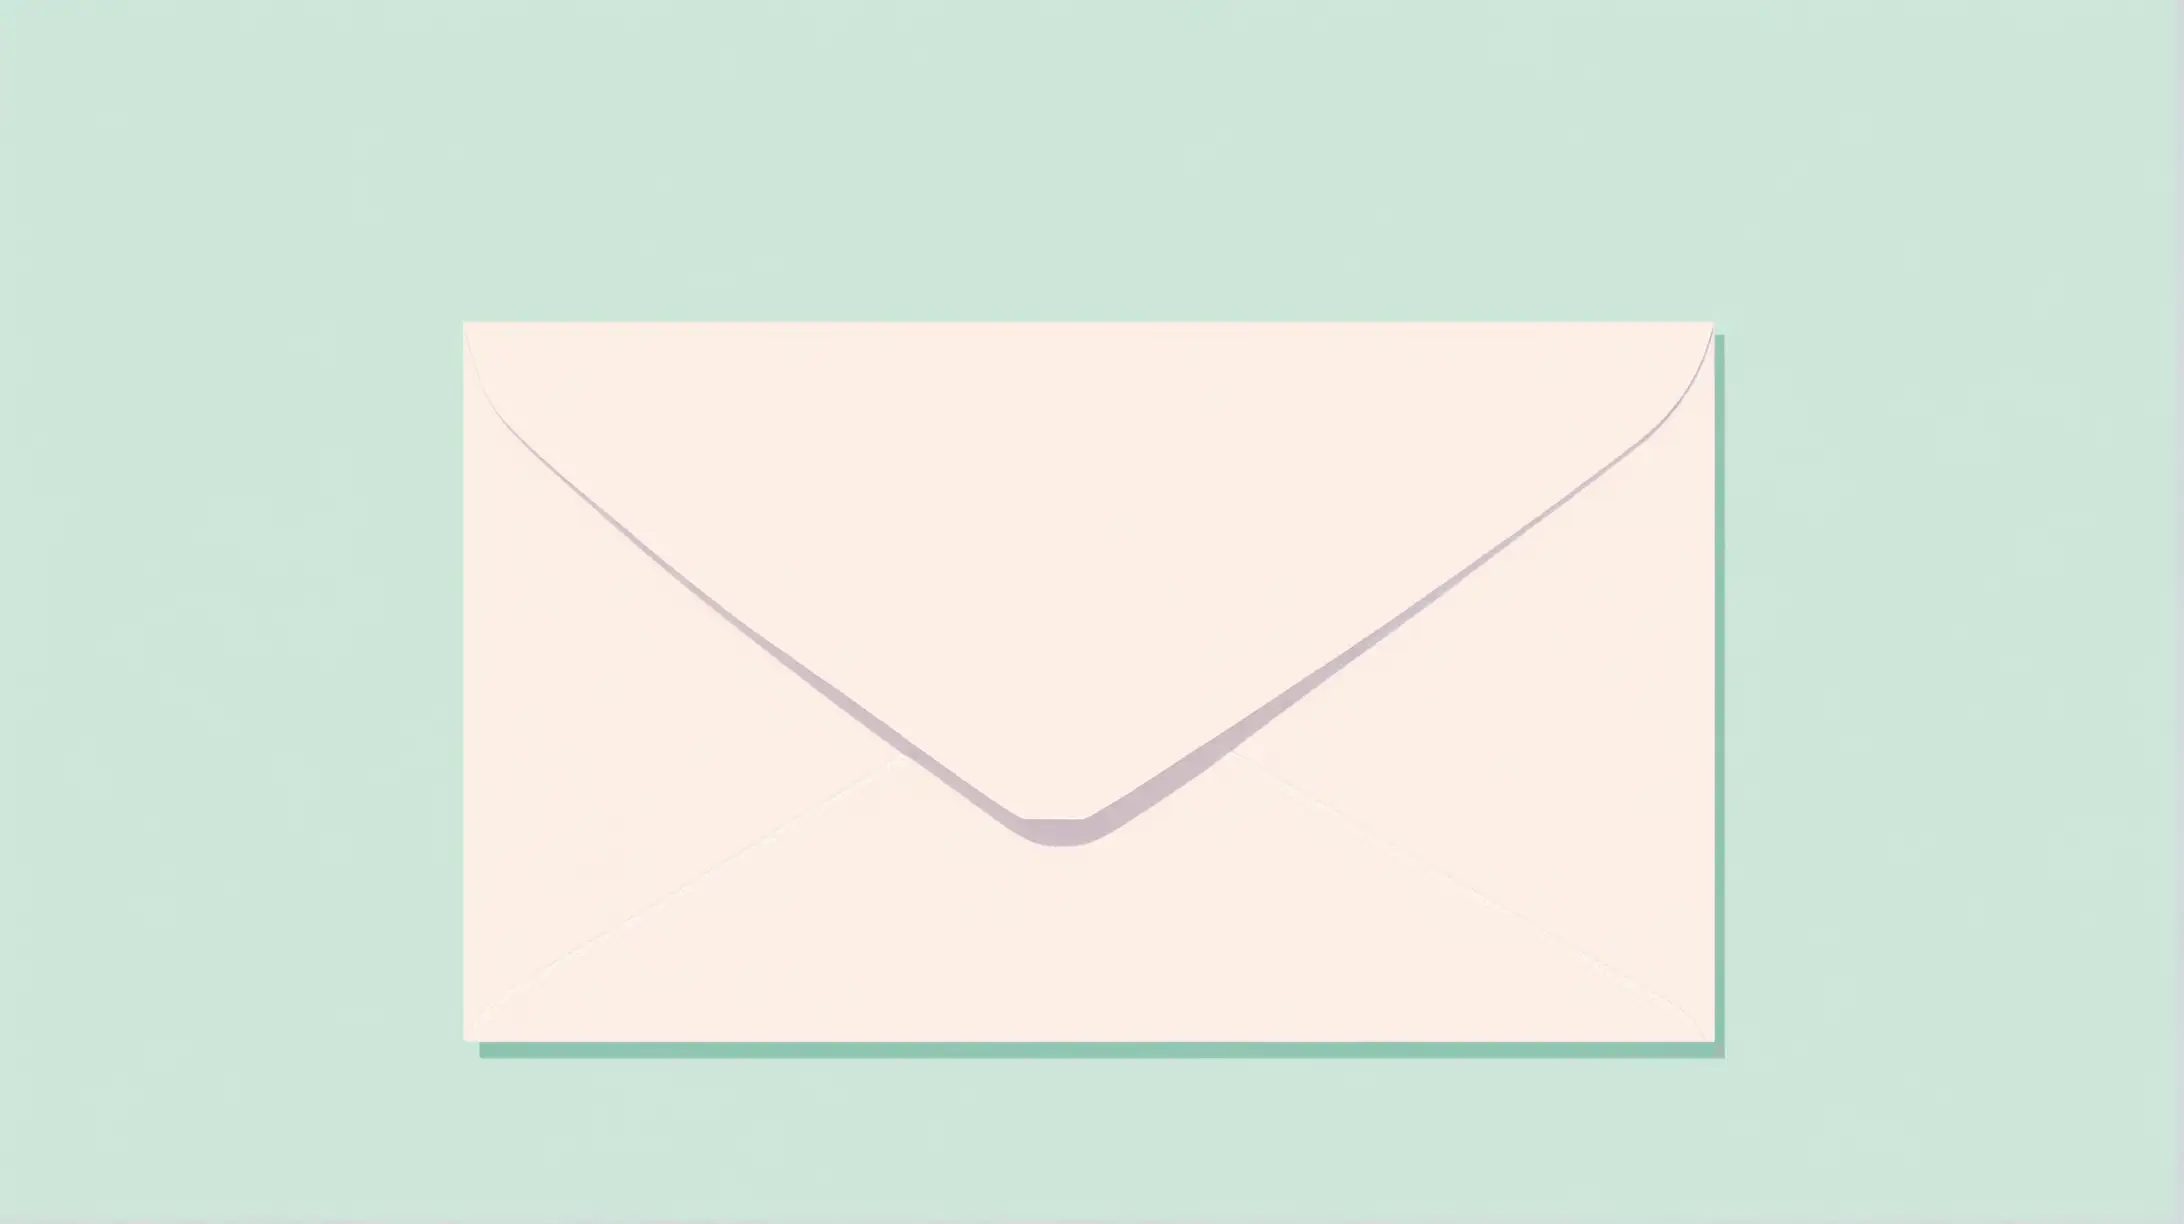 Generate an unopened envelope in a minimalist, pastel colors white design. background of the image should be gray. 
